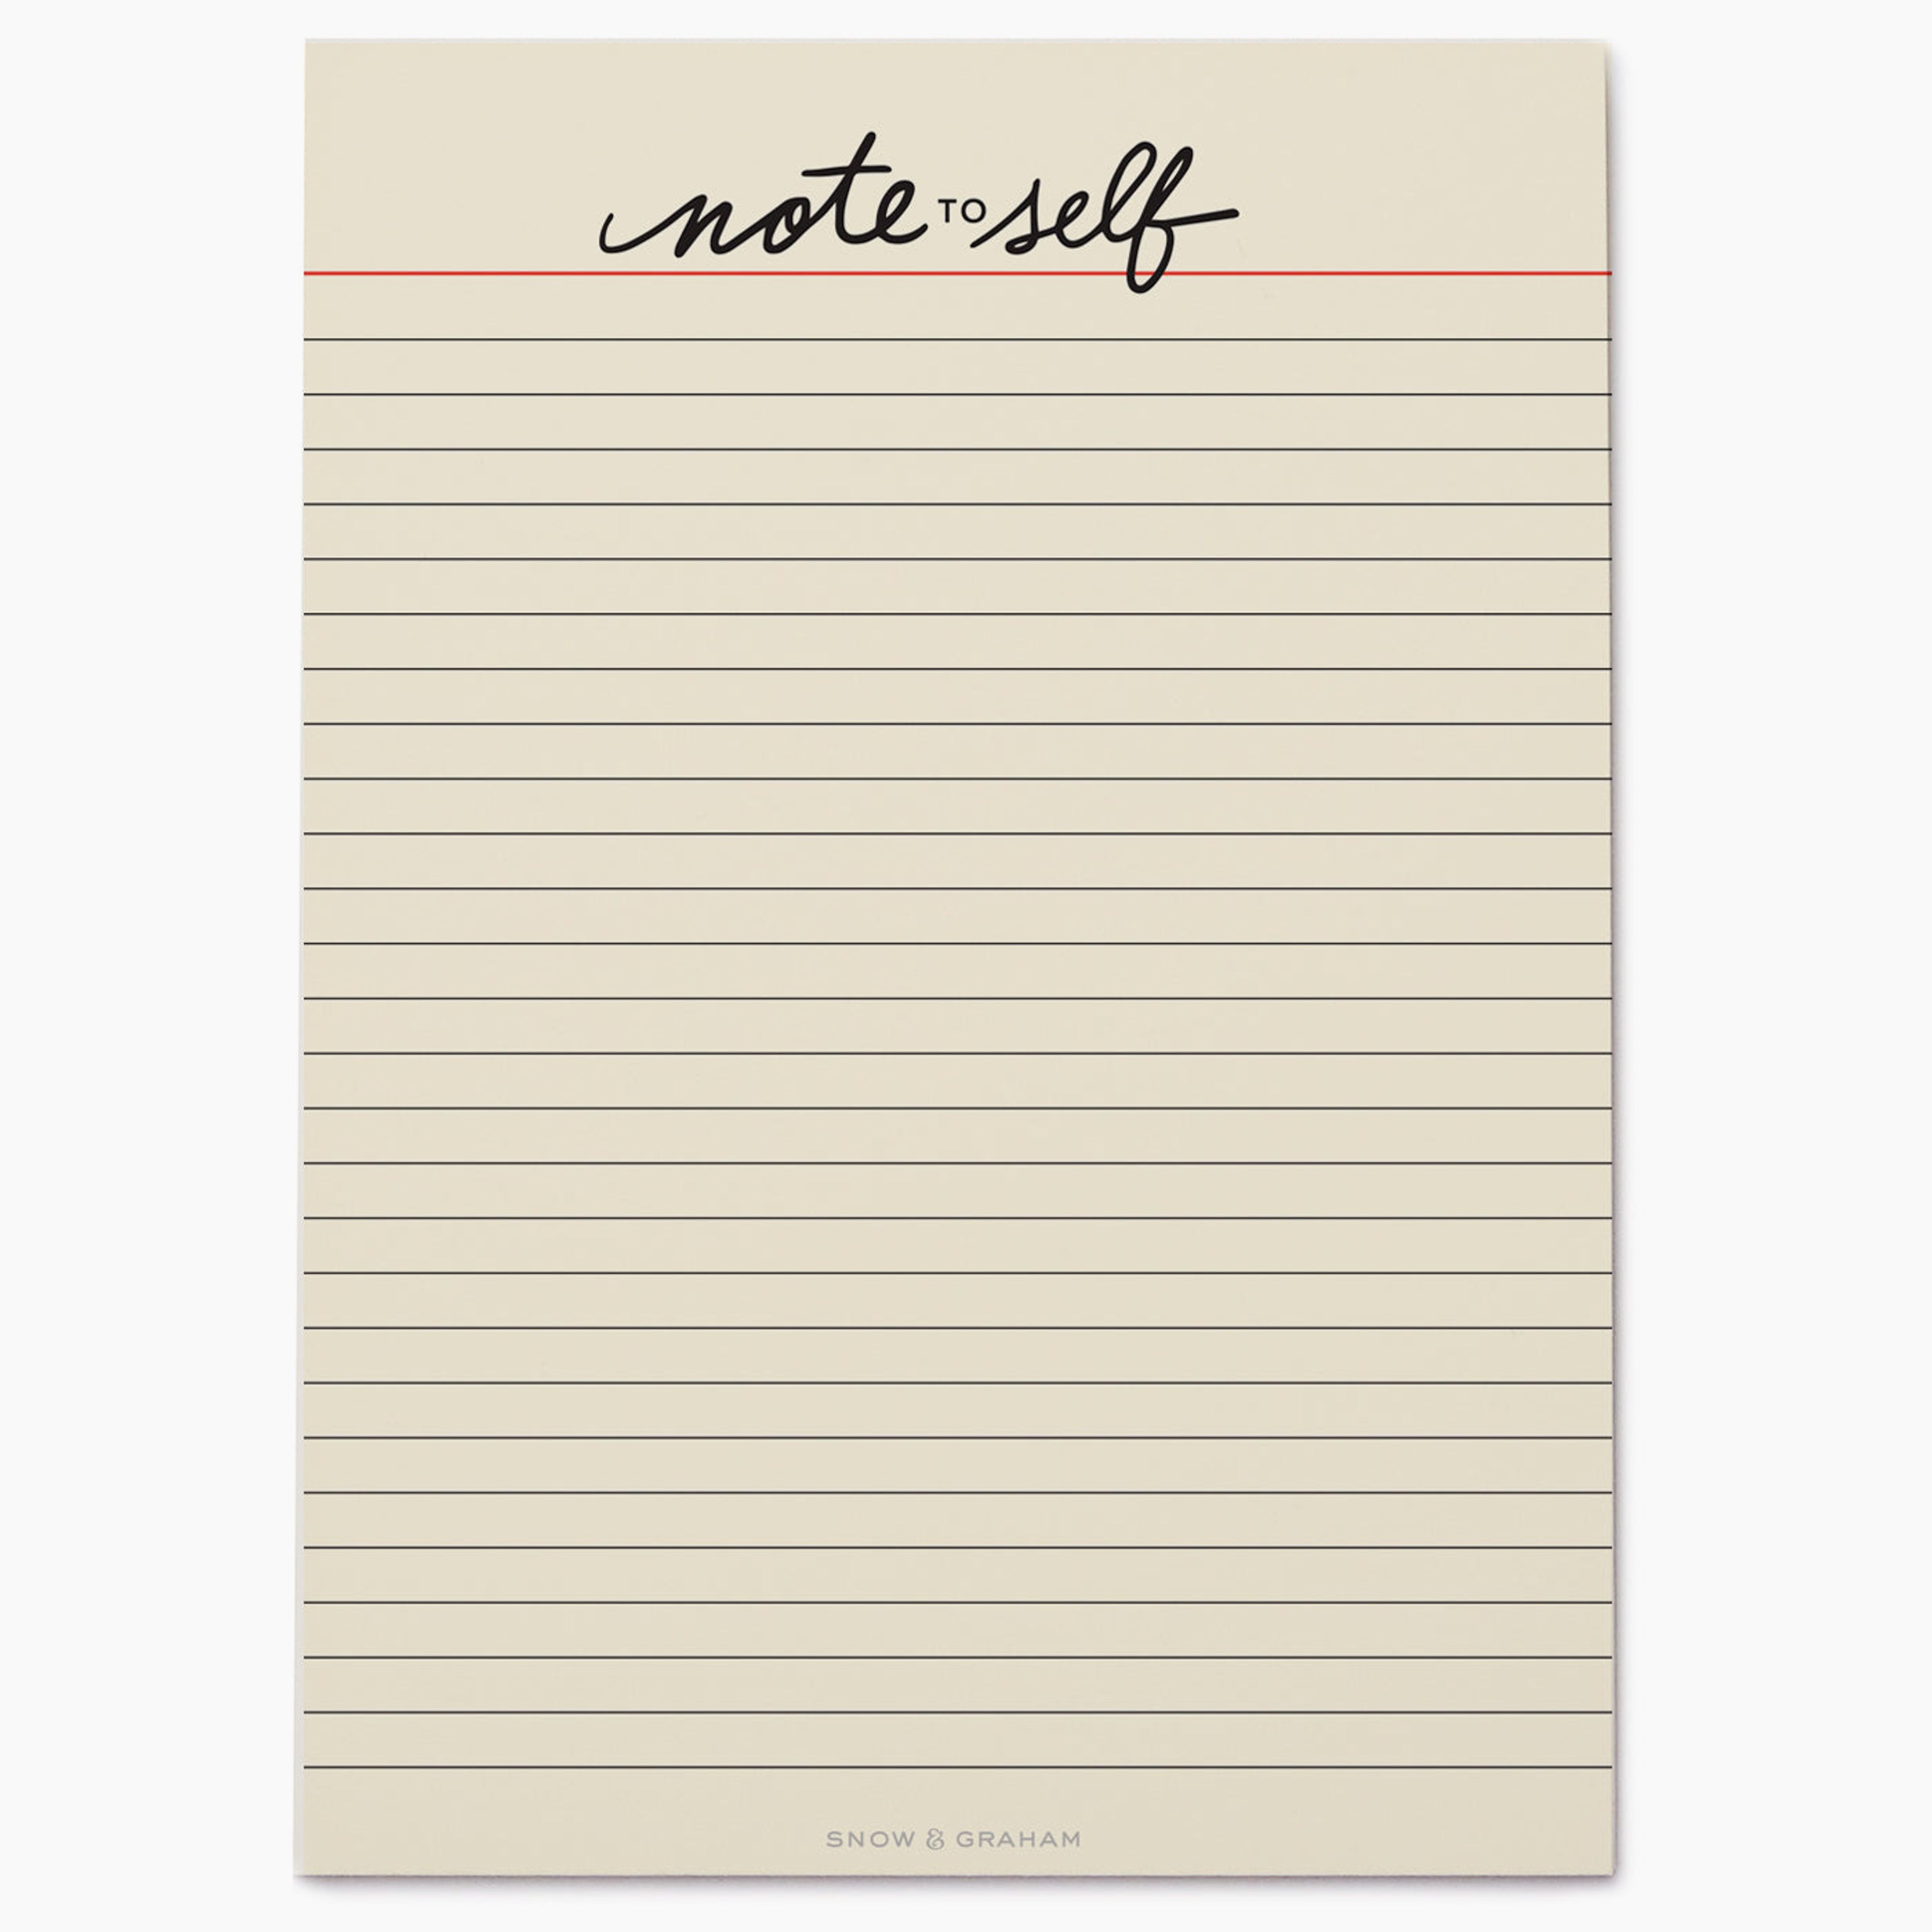 Note to Self notePAD